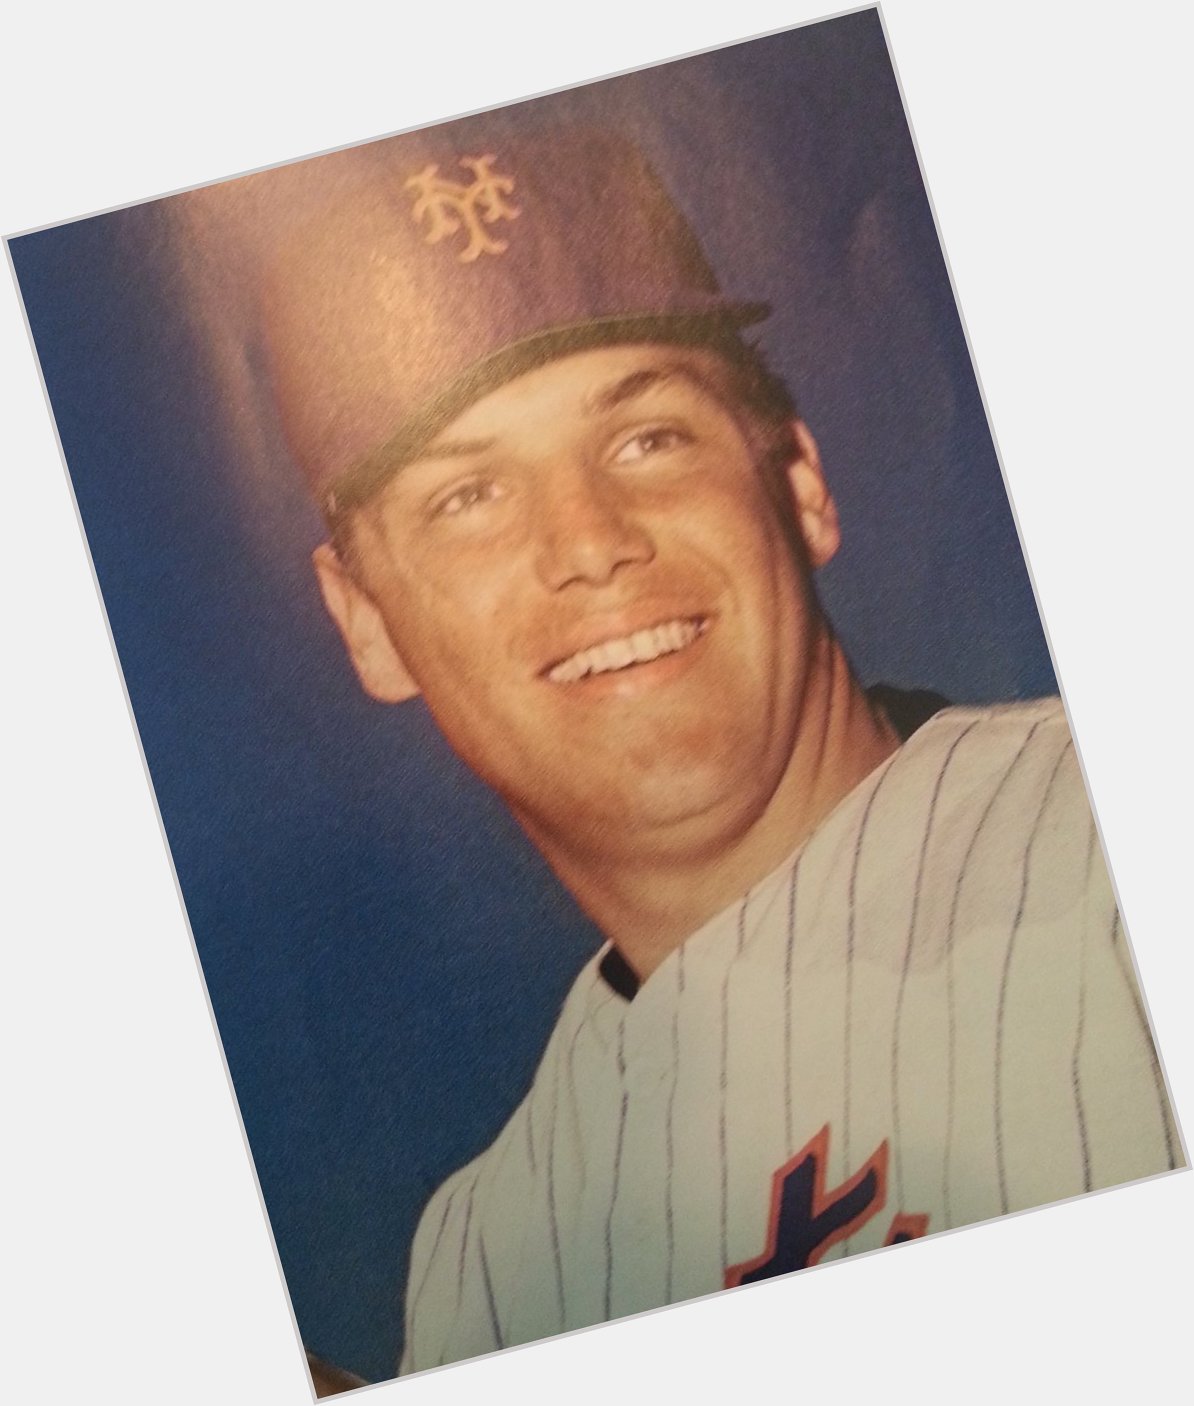 Happy Birthday to Seaver!!  You are still the gold standard for    